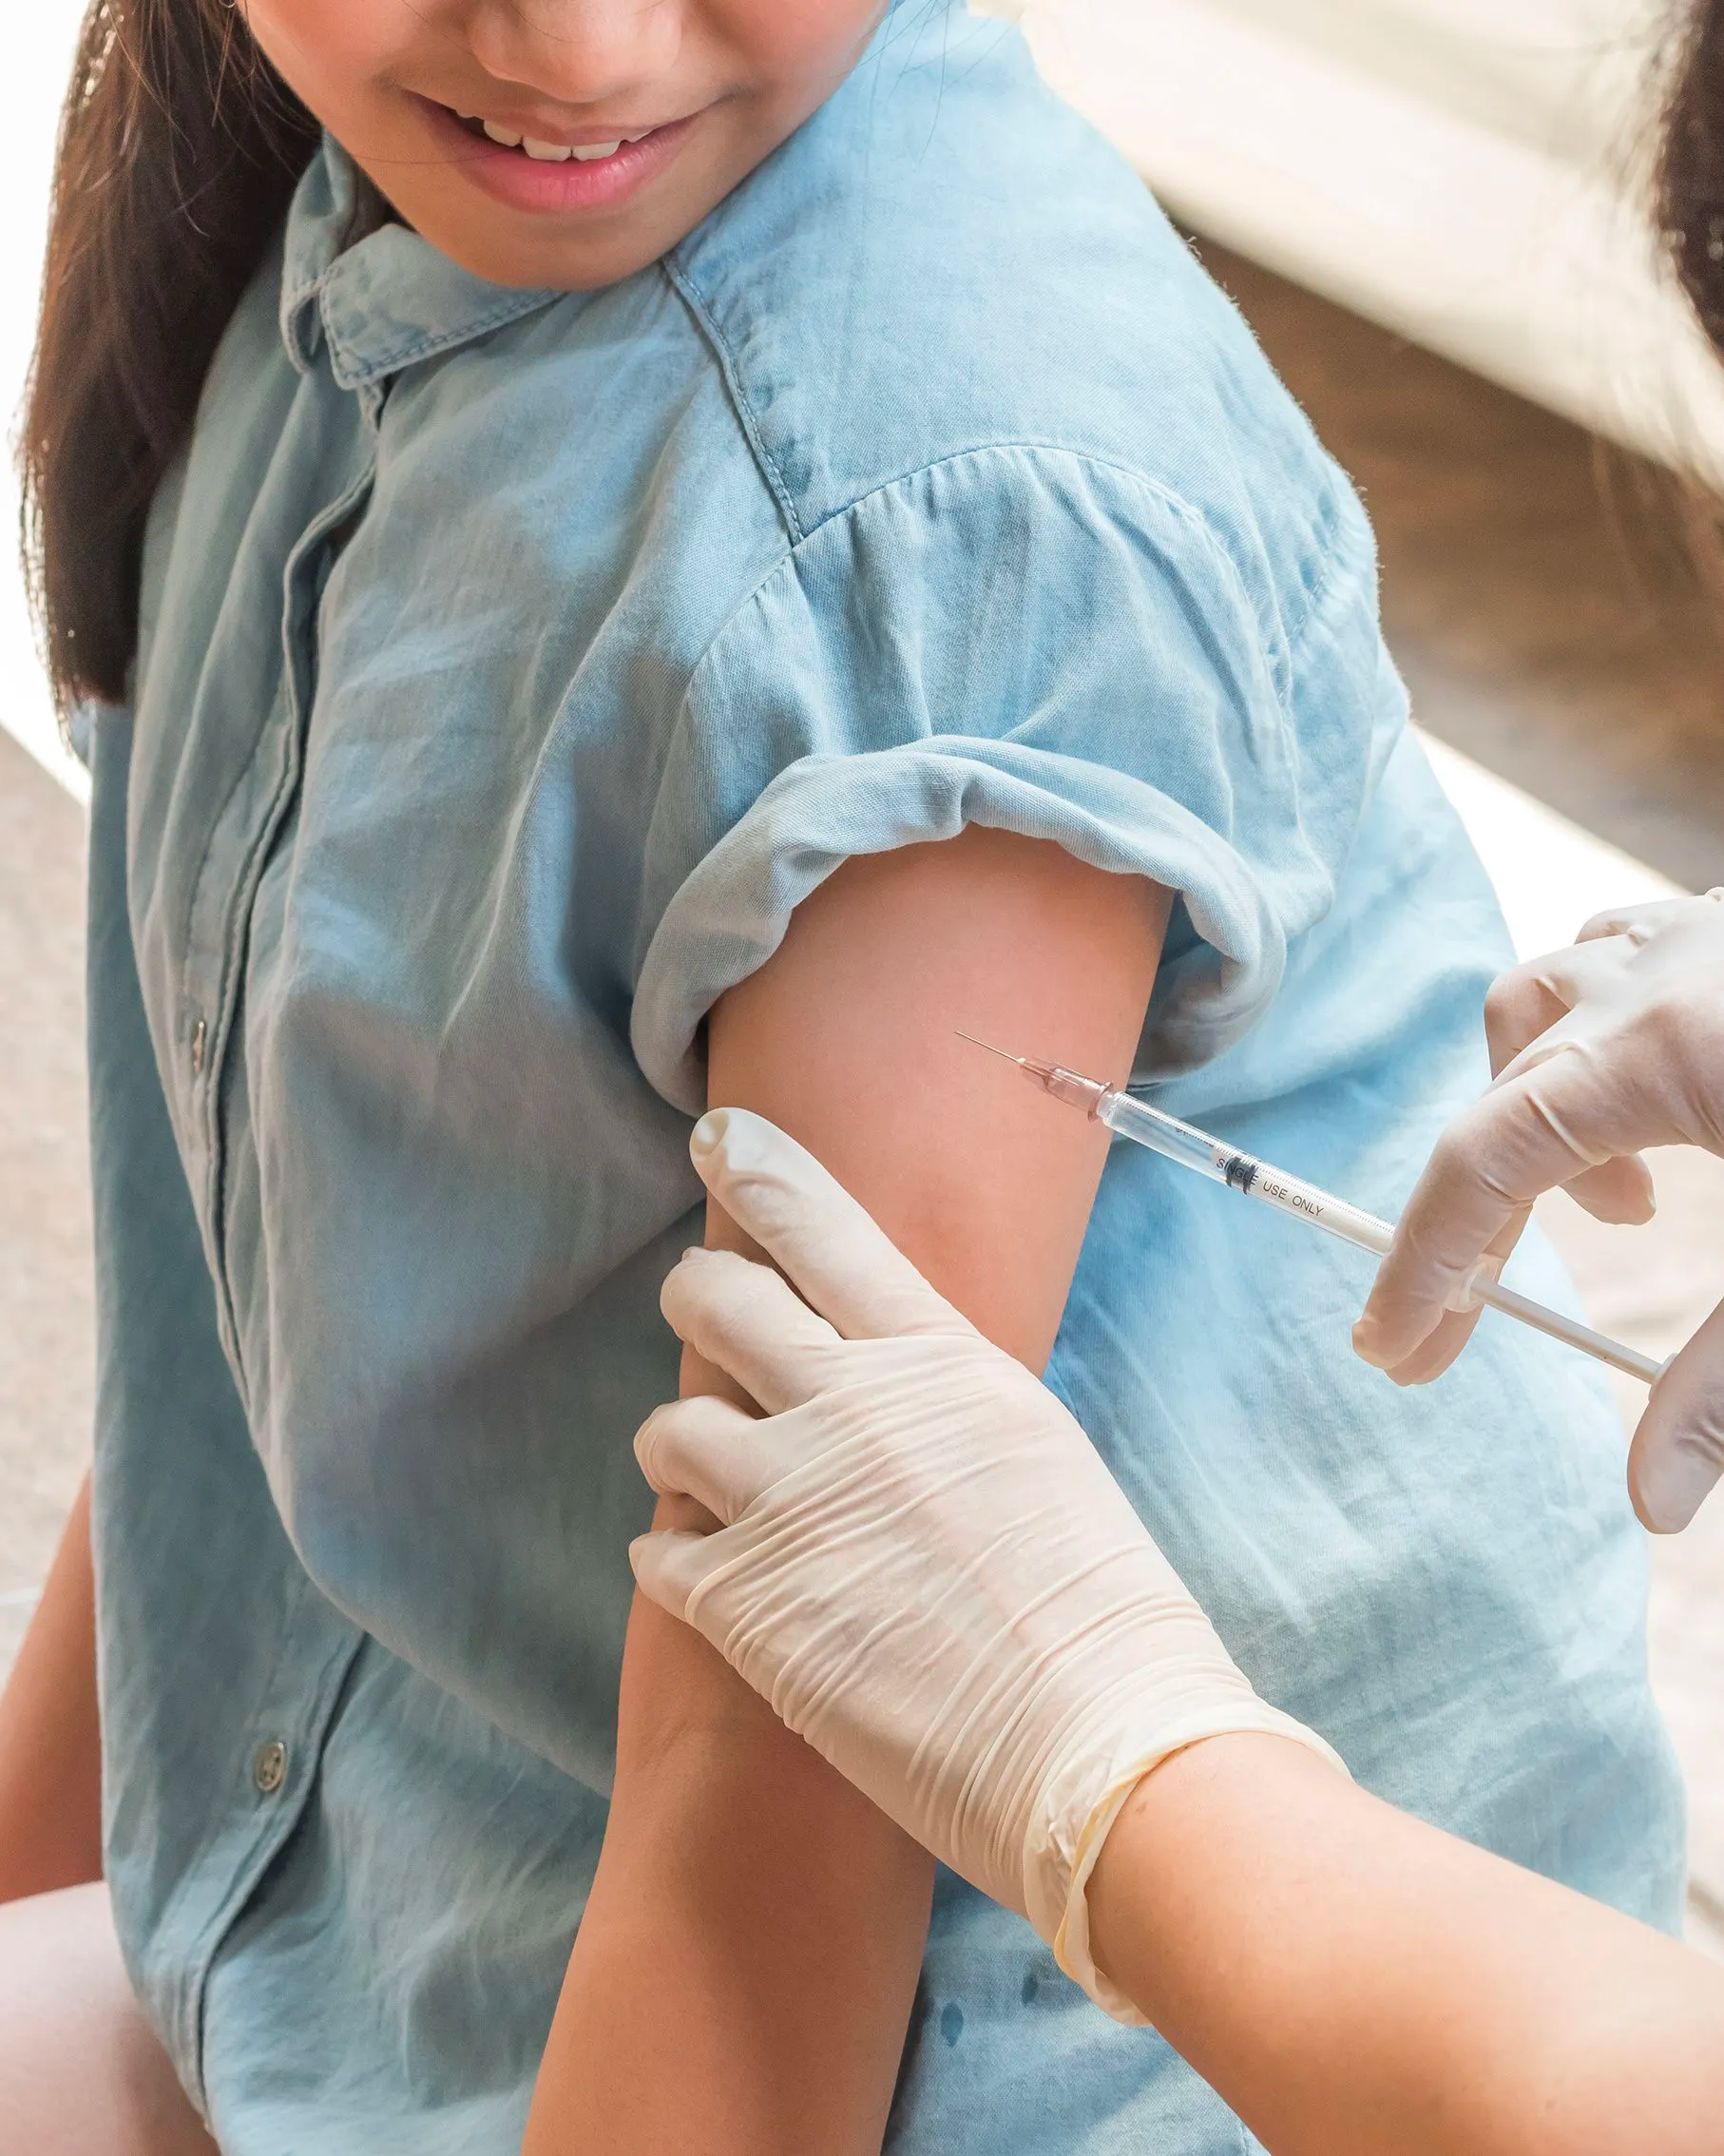 Long-term HPV vaccine efficacy: 10-year study reveals protection in youth | Image Credit: © Chinnapong - © Chinnapong - stock.adobe.com.